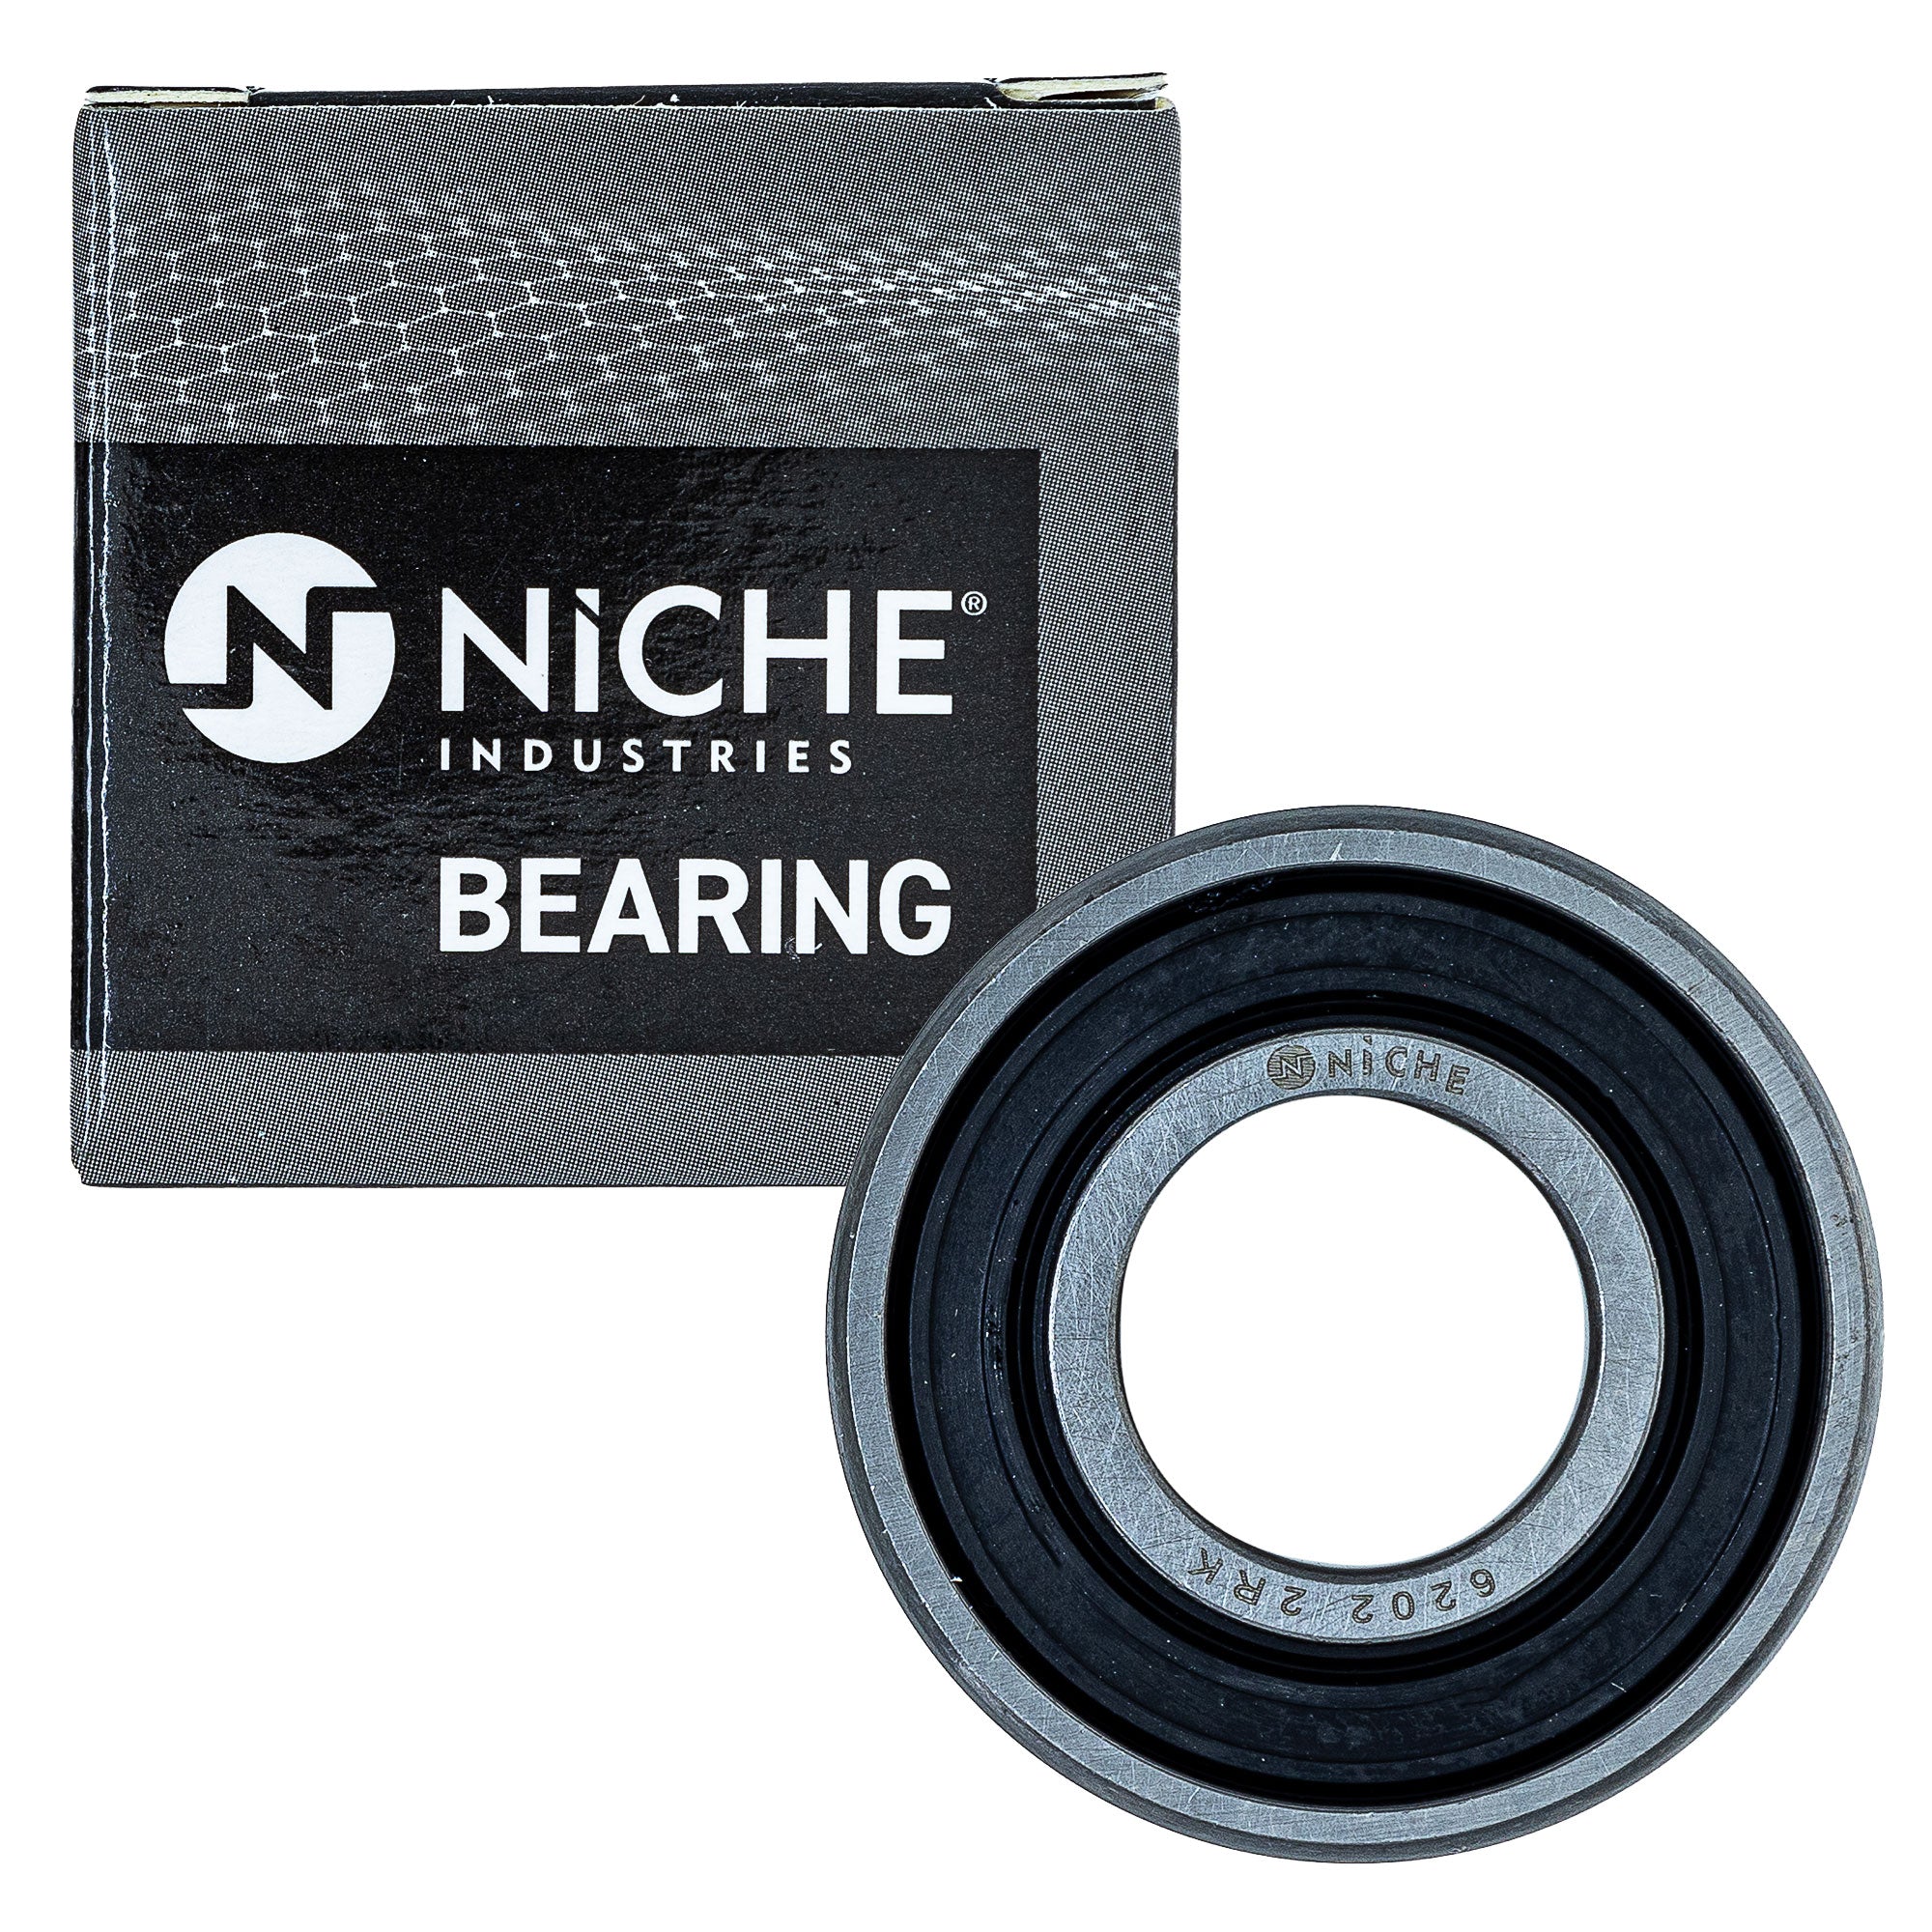 NICHE 519-CBB2298R Bearing 10-Pack for zOTHER TTR250 TTR225 Shadow